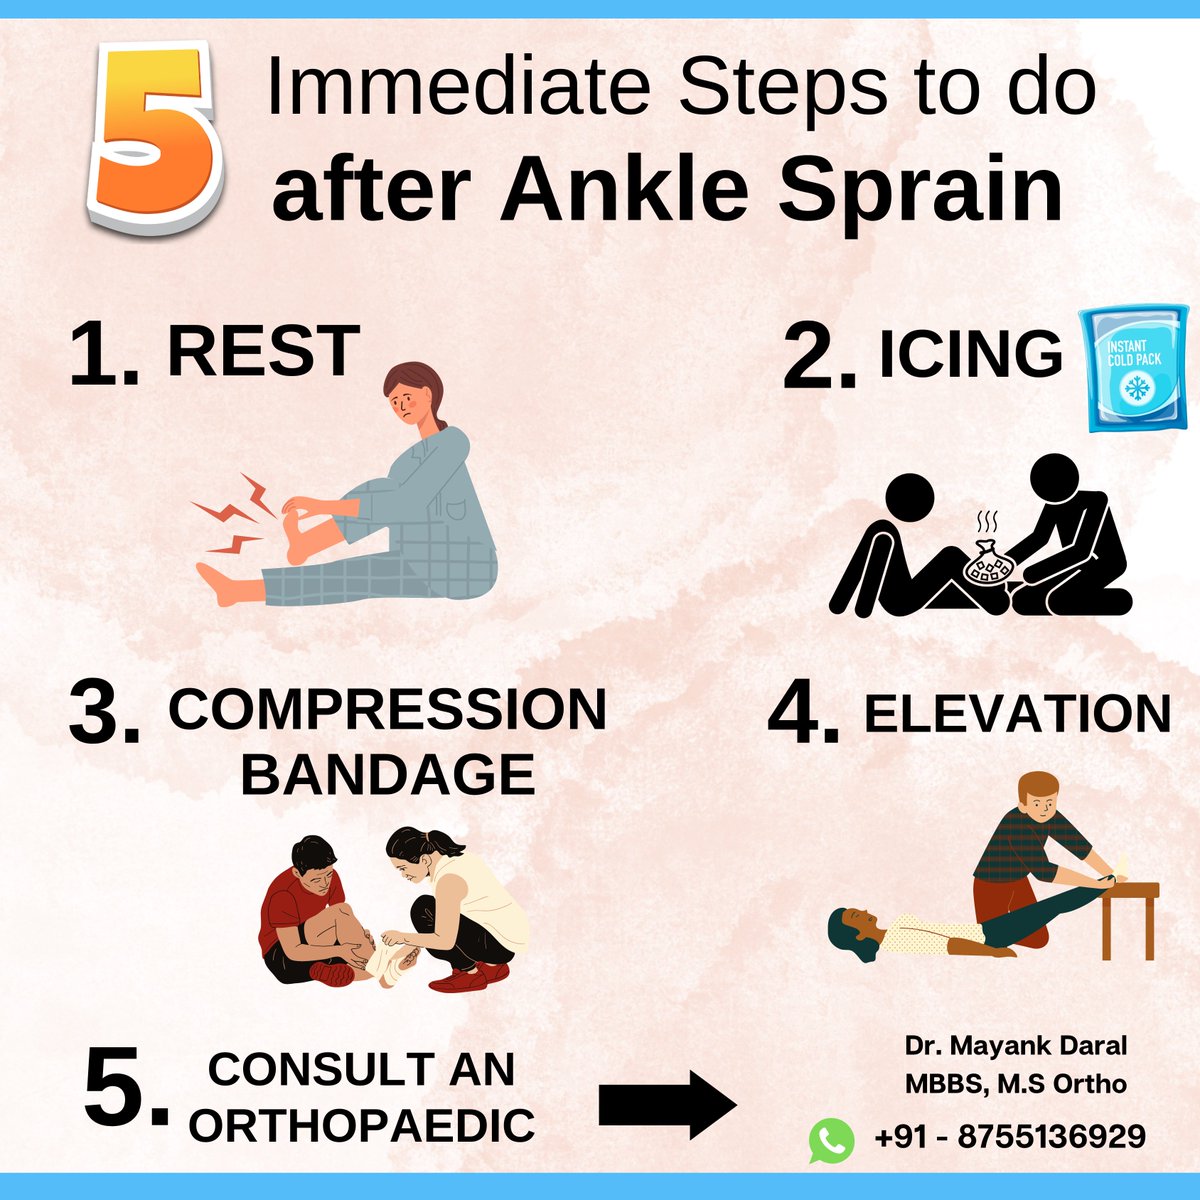 5 Immediate Steps to do after Ankle Sprain.

#anklesprain #anklepain #rice